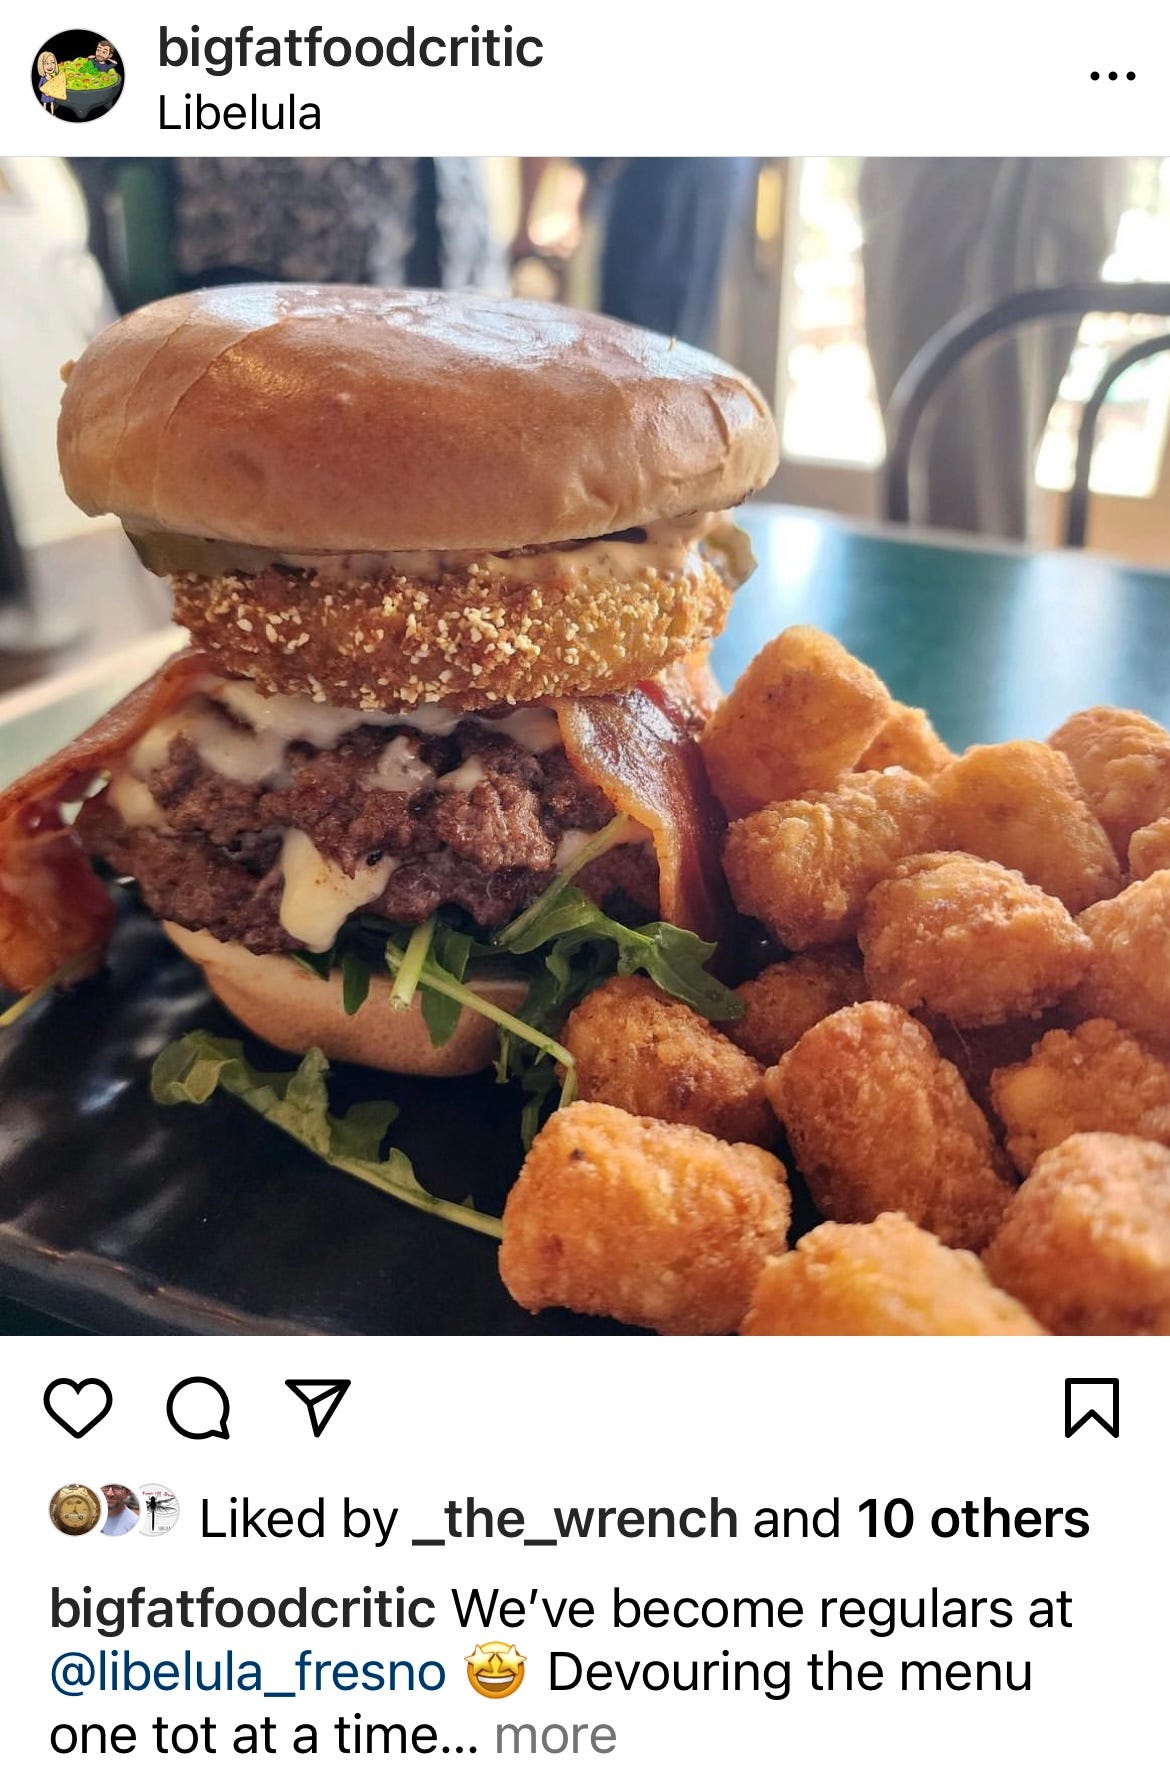 A burger from Libelula in Fresno California, surounded by tater tots